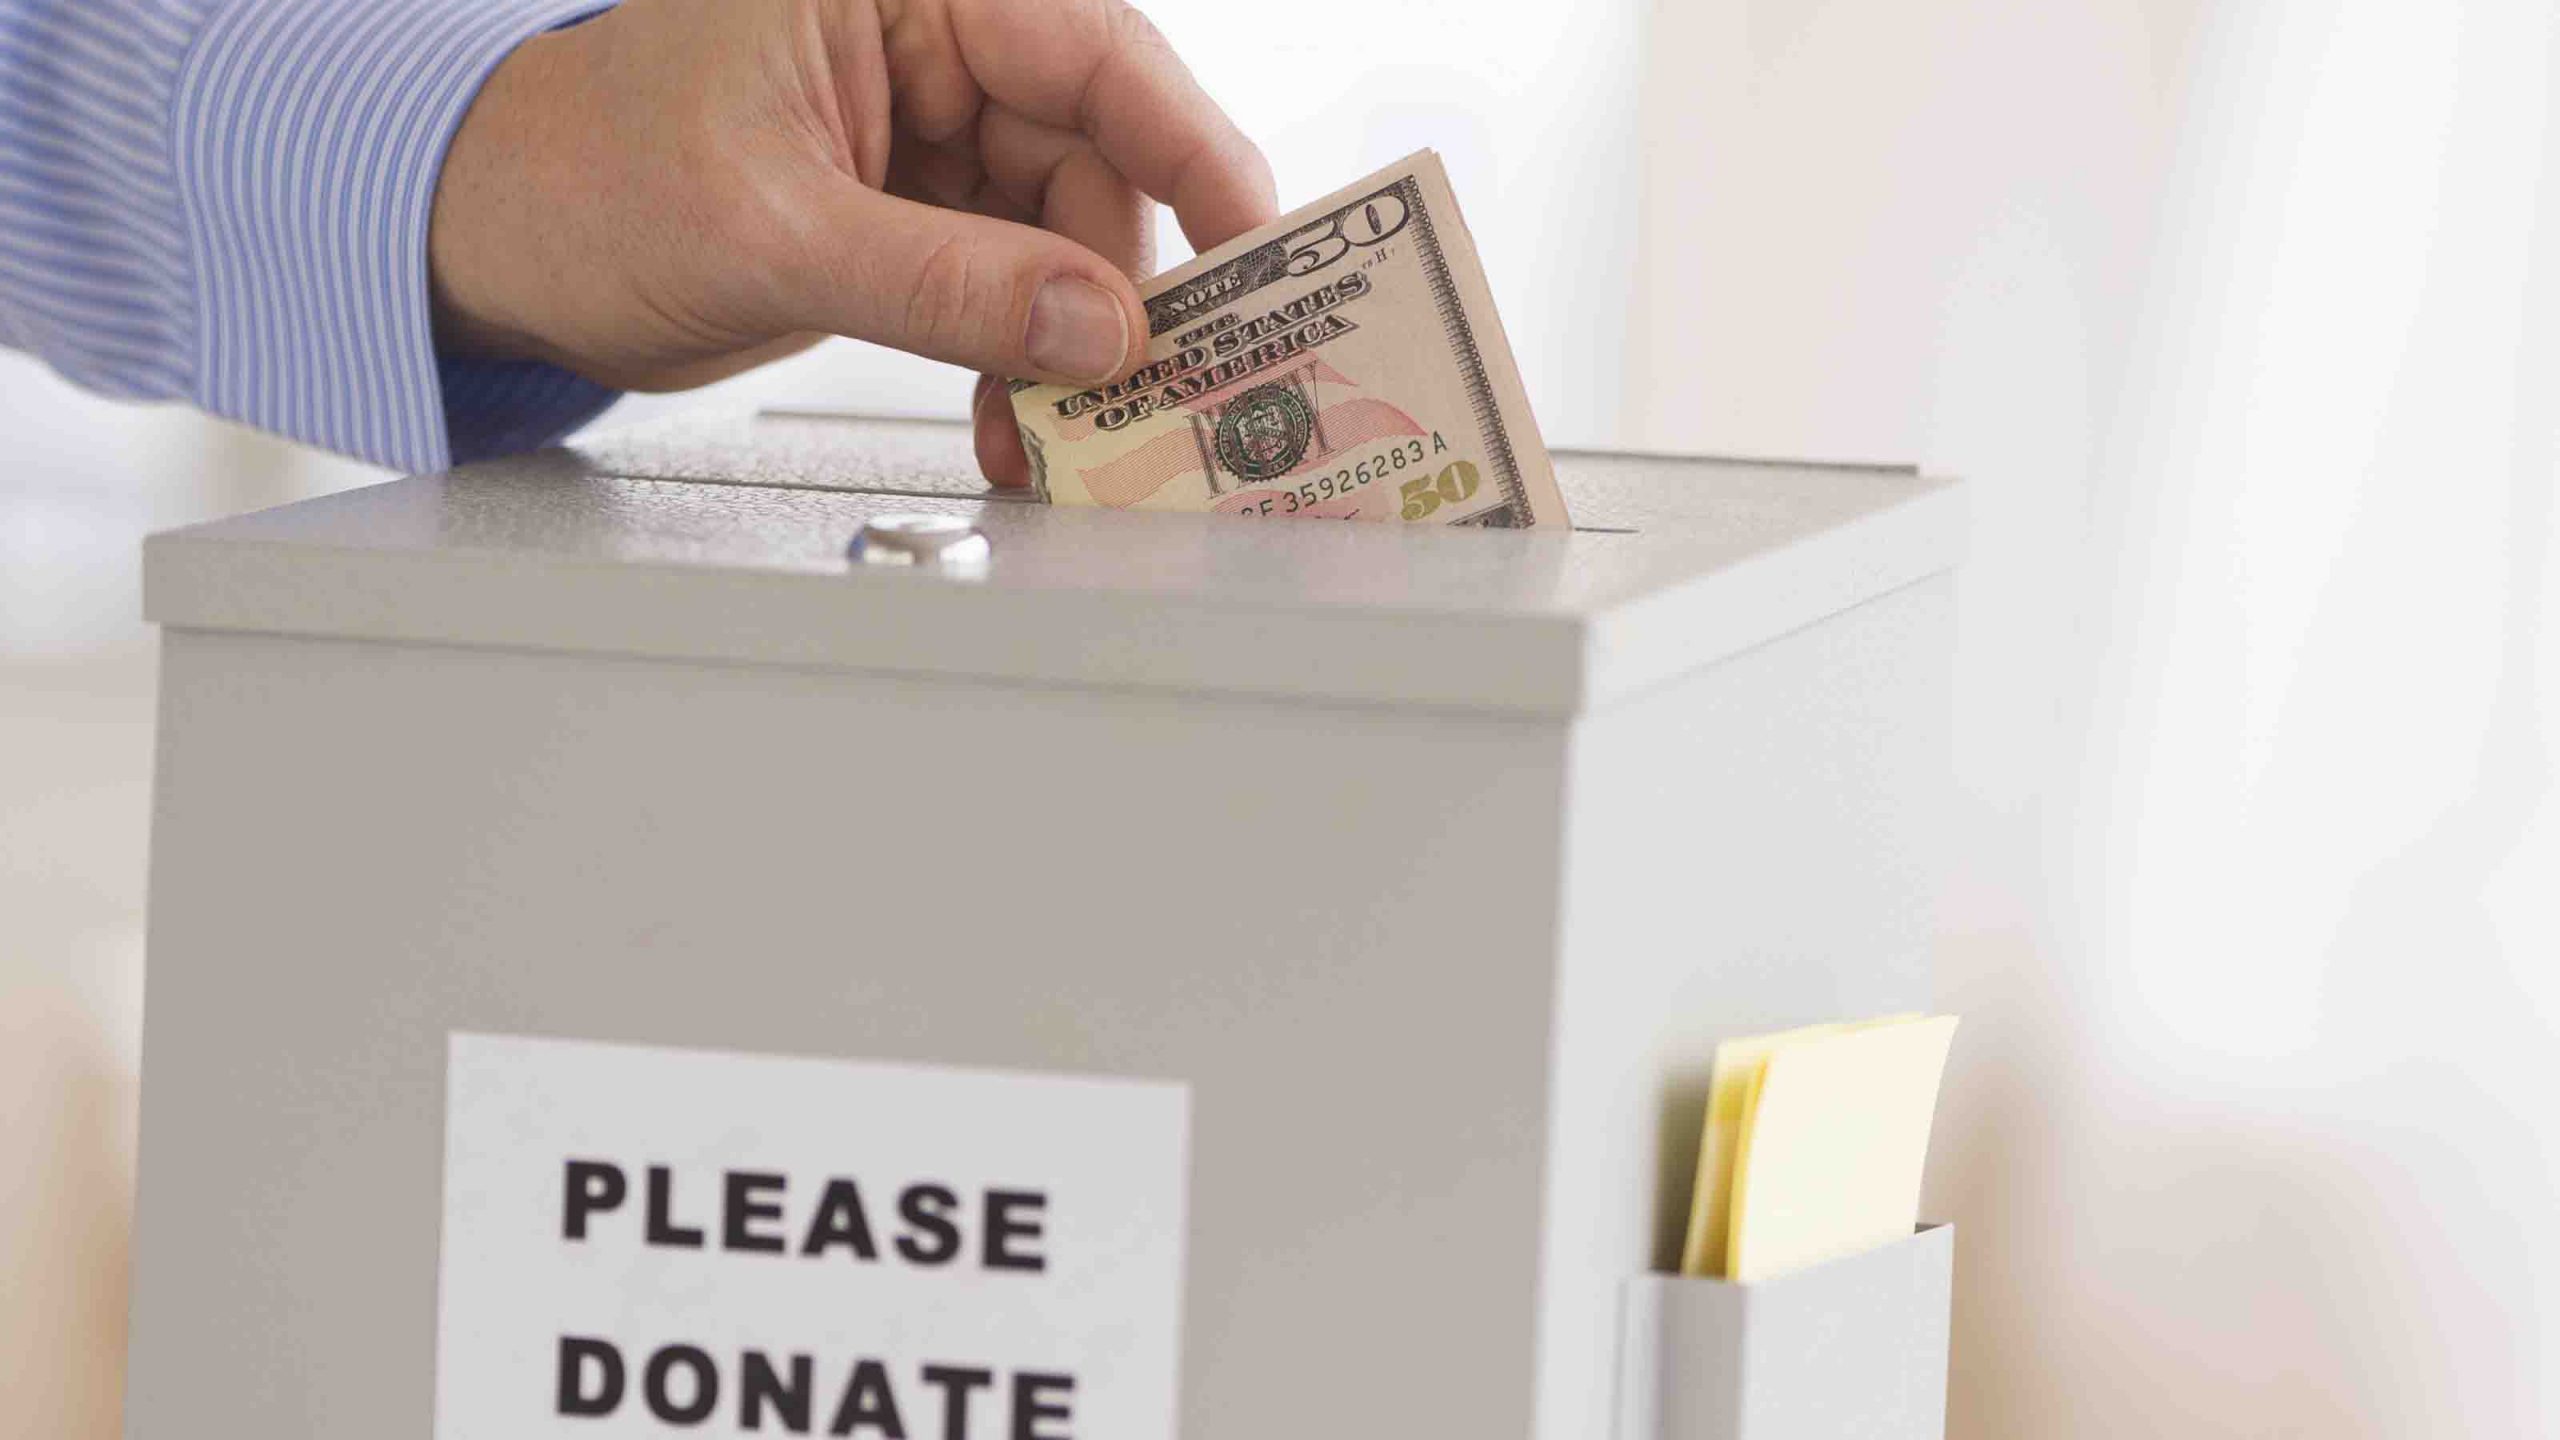 Jersey City, New Jersey, Man's Hand Putting Dollars Into Donation Box